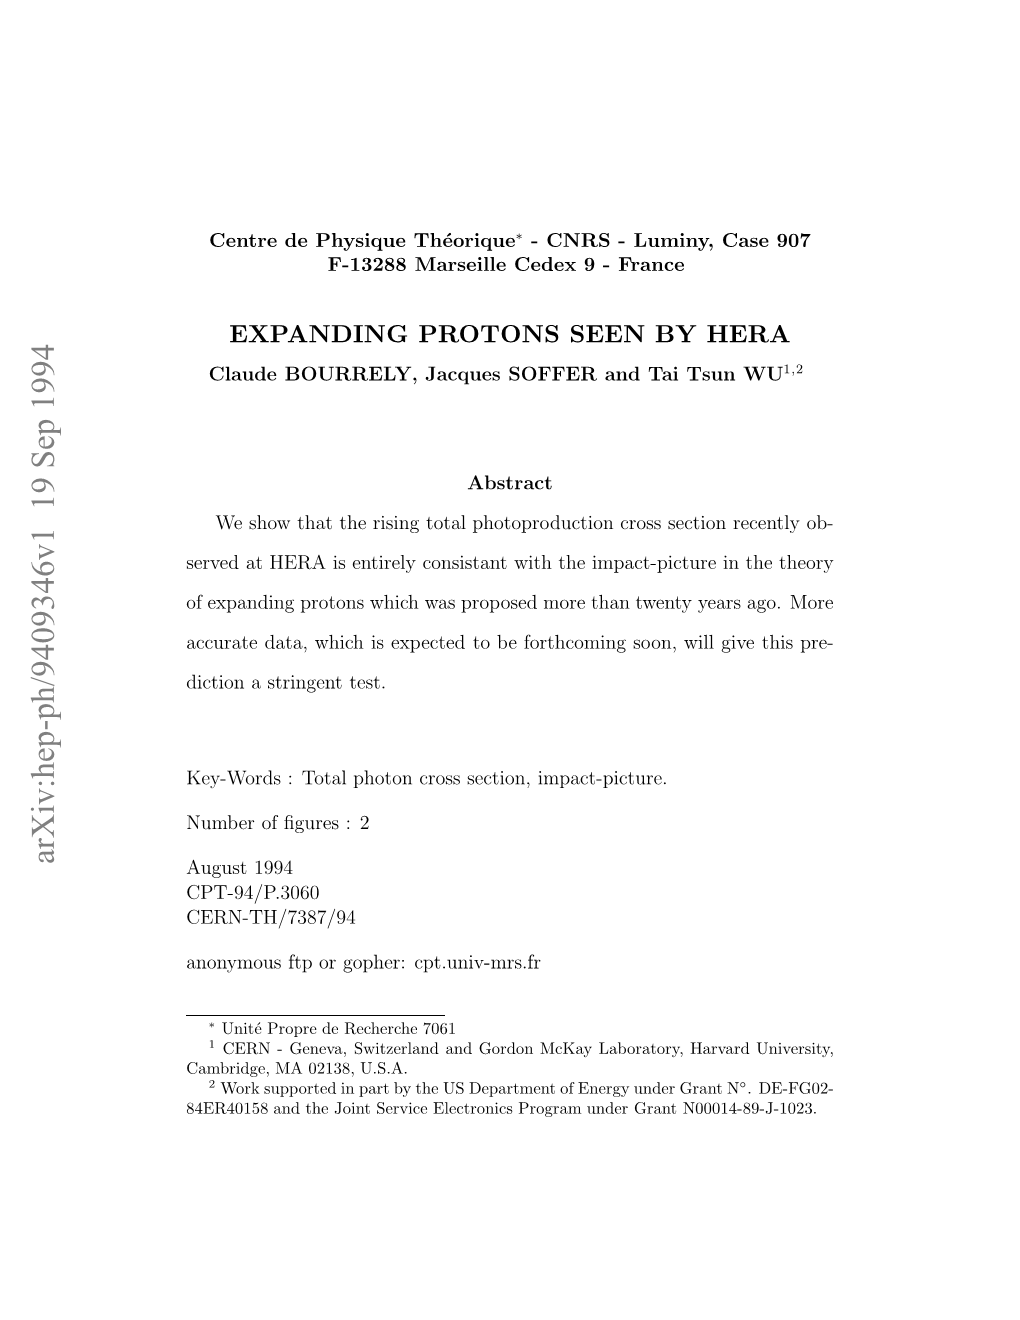 Expanding Protons Seen by HERA